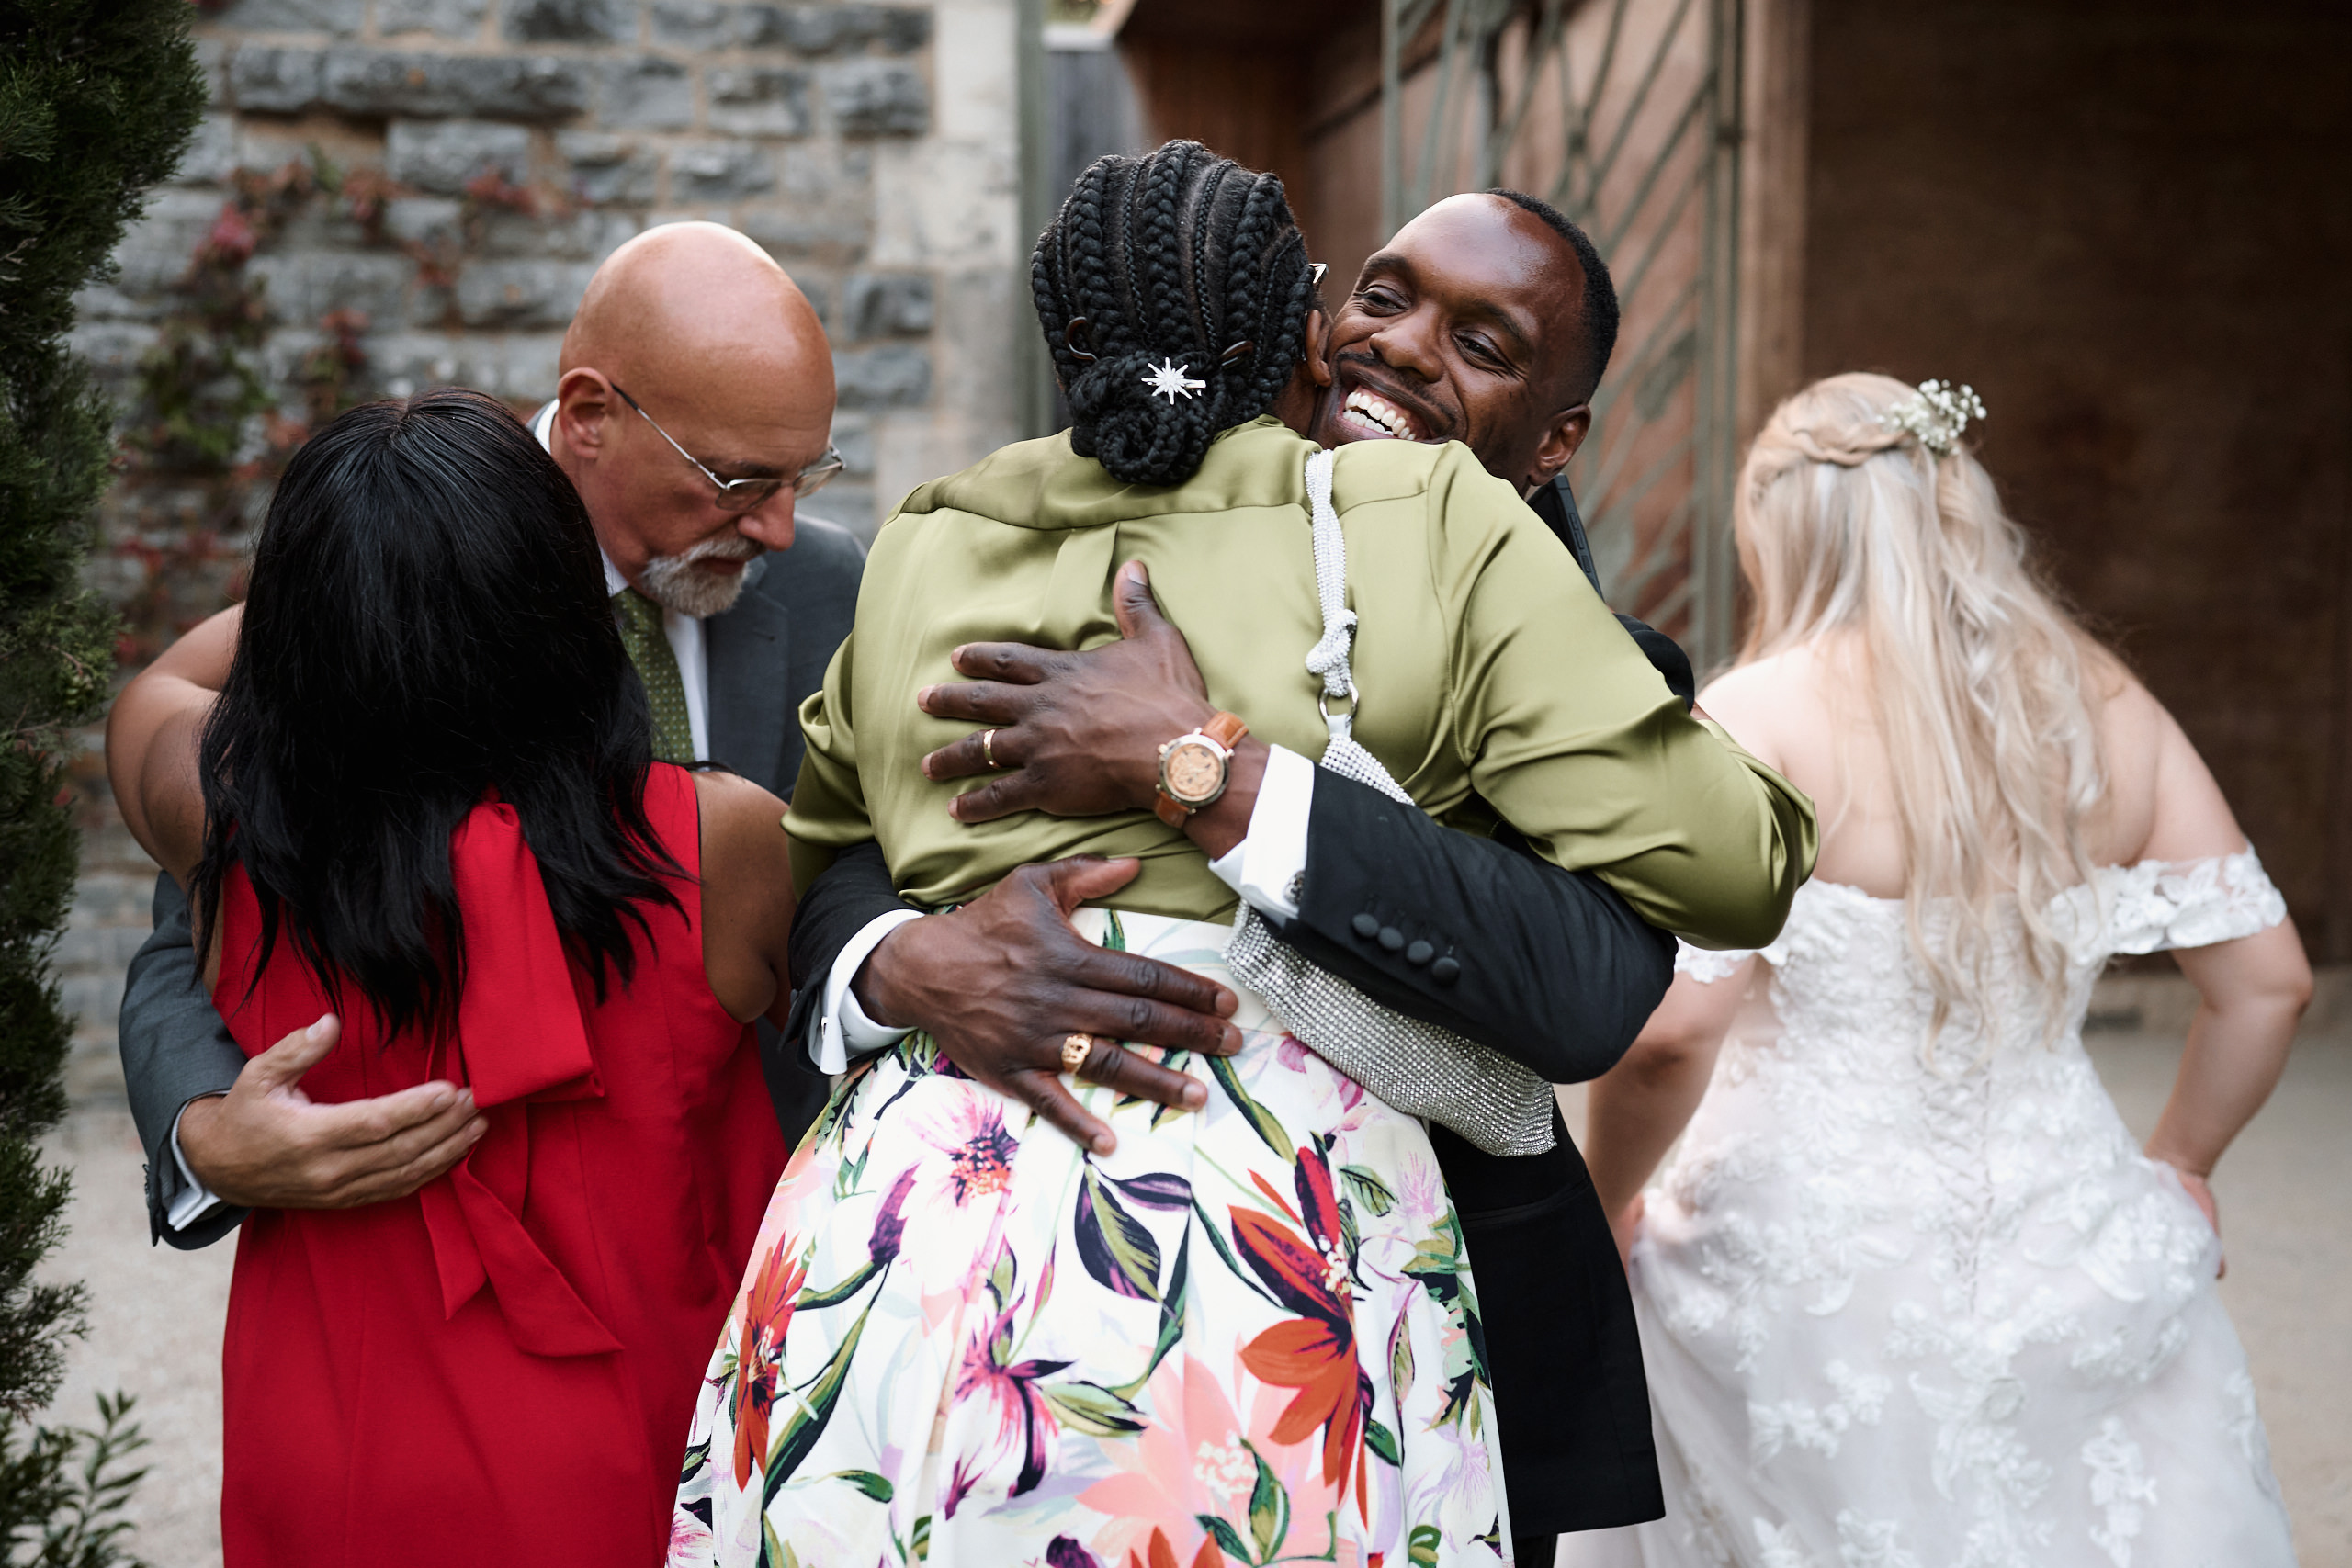 A couple getting married are hugging in front of a crowd.